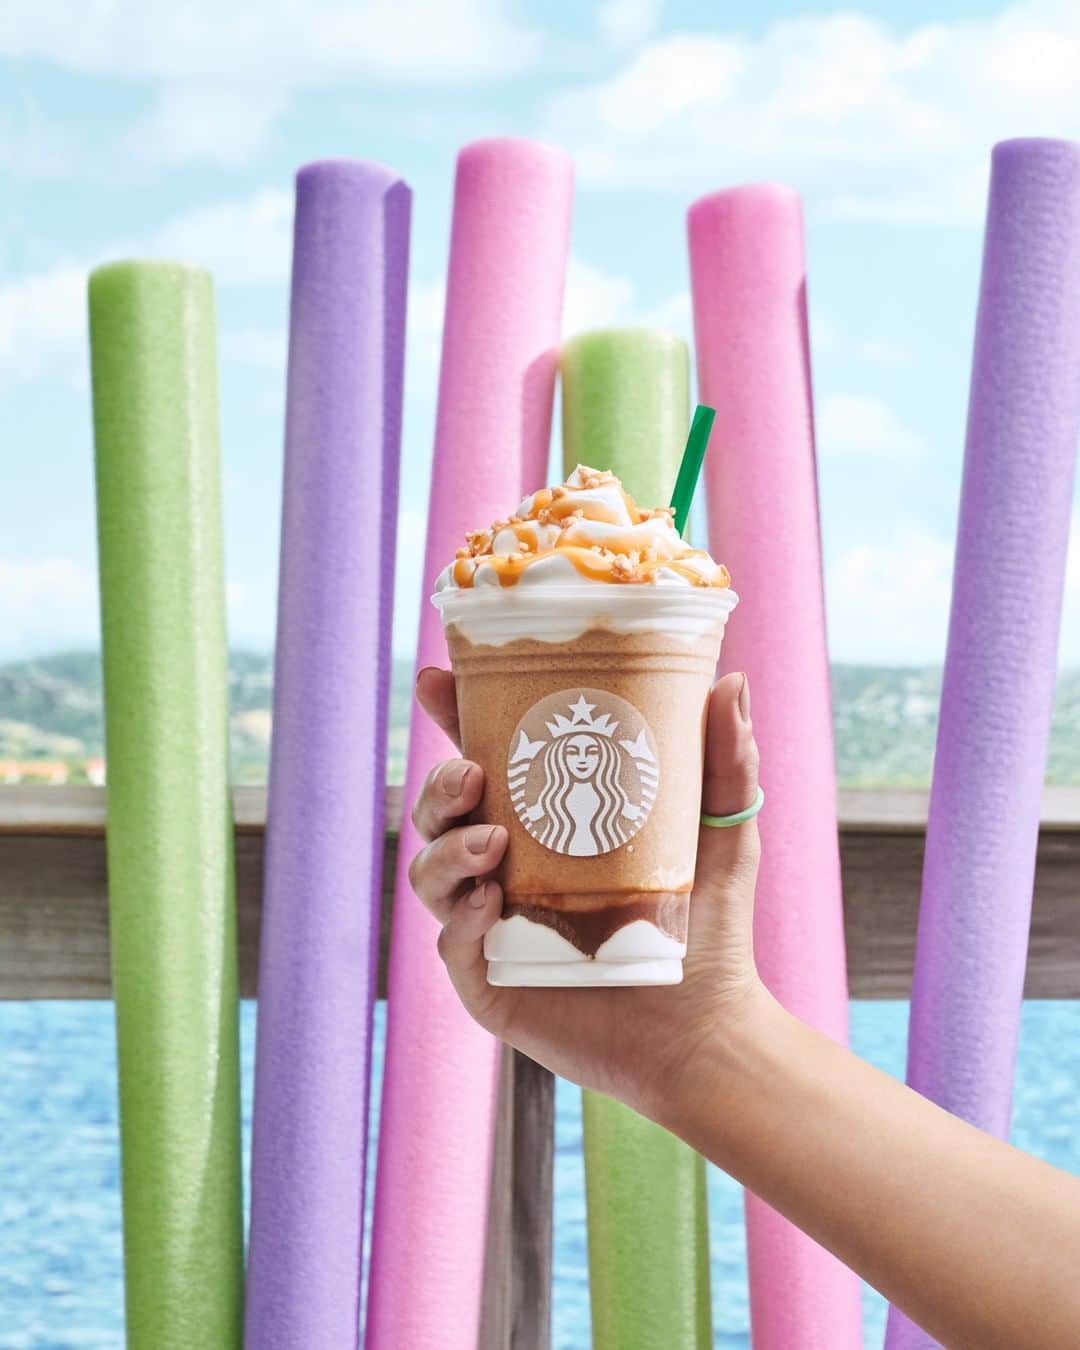 18 Best Sweet Starbucks Drinks To Fulfill Your Sugar Cravings ...